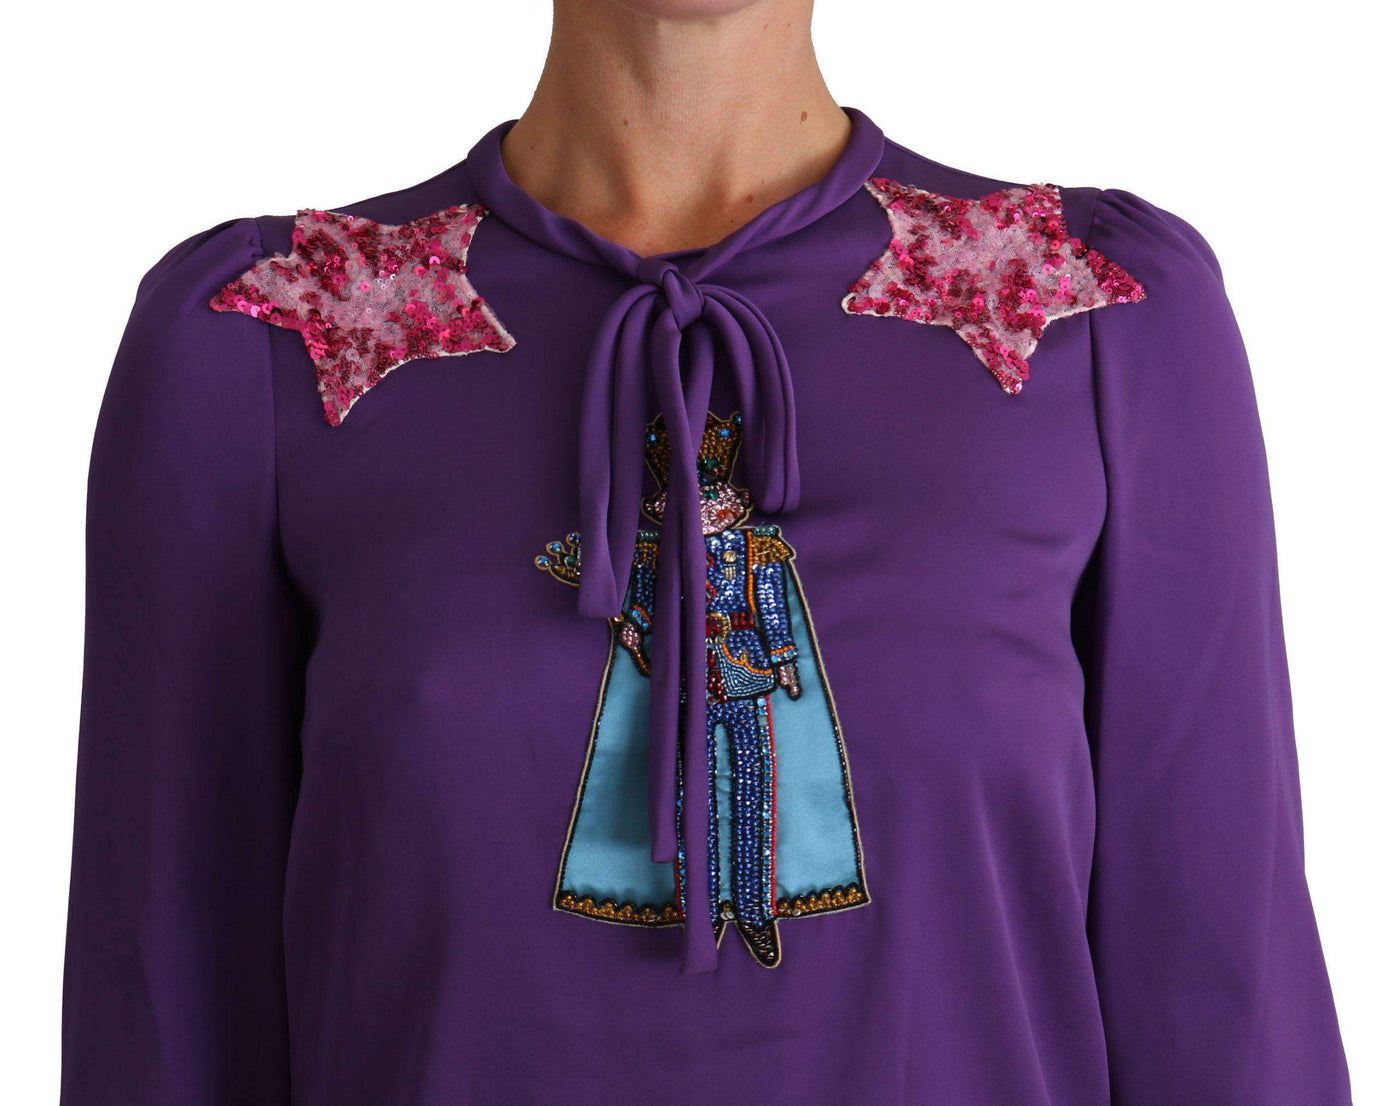 Dolce & Gabbana  Purple Blouse Prince  Fairy Tale Embellished  Top #women, Brand_Dolce & Gabbana, Catch, Dolce & Gabbana, feed-agegroup-adult, feed-color-purple, feed-gender-female, feed-size-IT36|XXS, feed-size-IT38|XS, feed-size-IT40|S, feed-size-IT44|L, Gender_Women, IT36|XXS, IT38|XS, IT40|S, IT44|L, Kogan, Purple, Tops & T-Shirts - Women - Clothing, Women - New Arrivals at SEYMAYKA